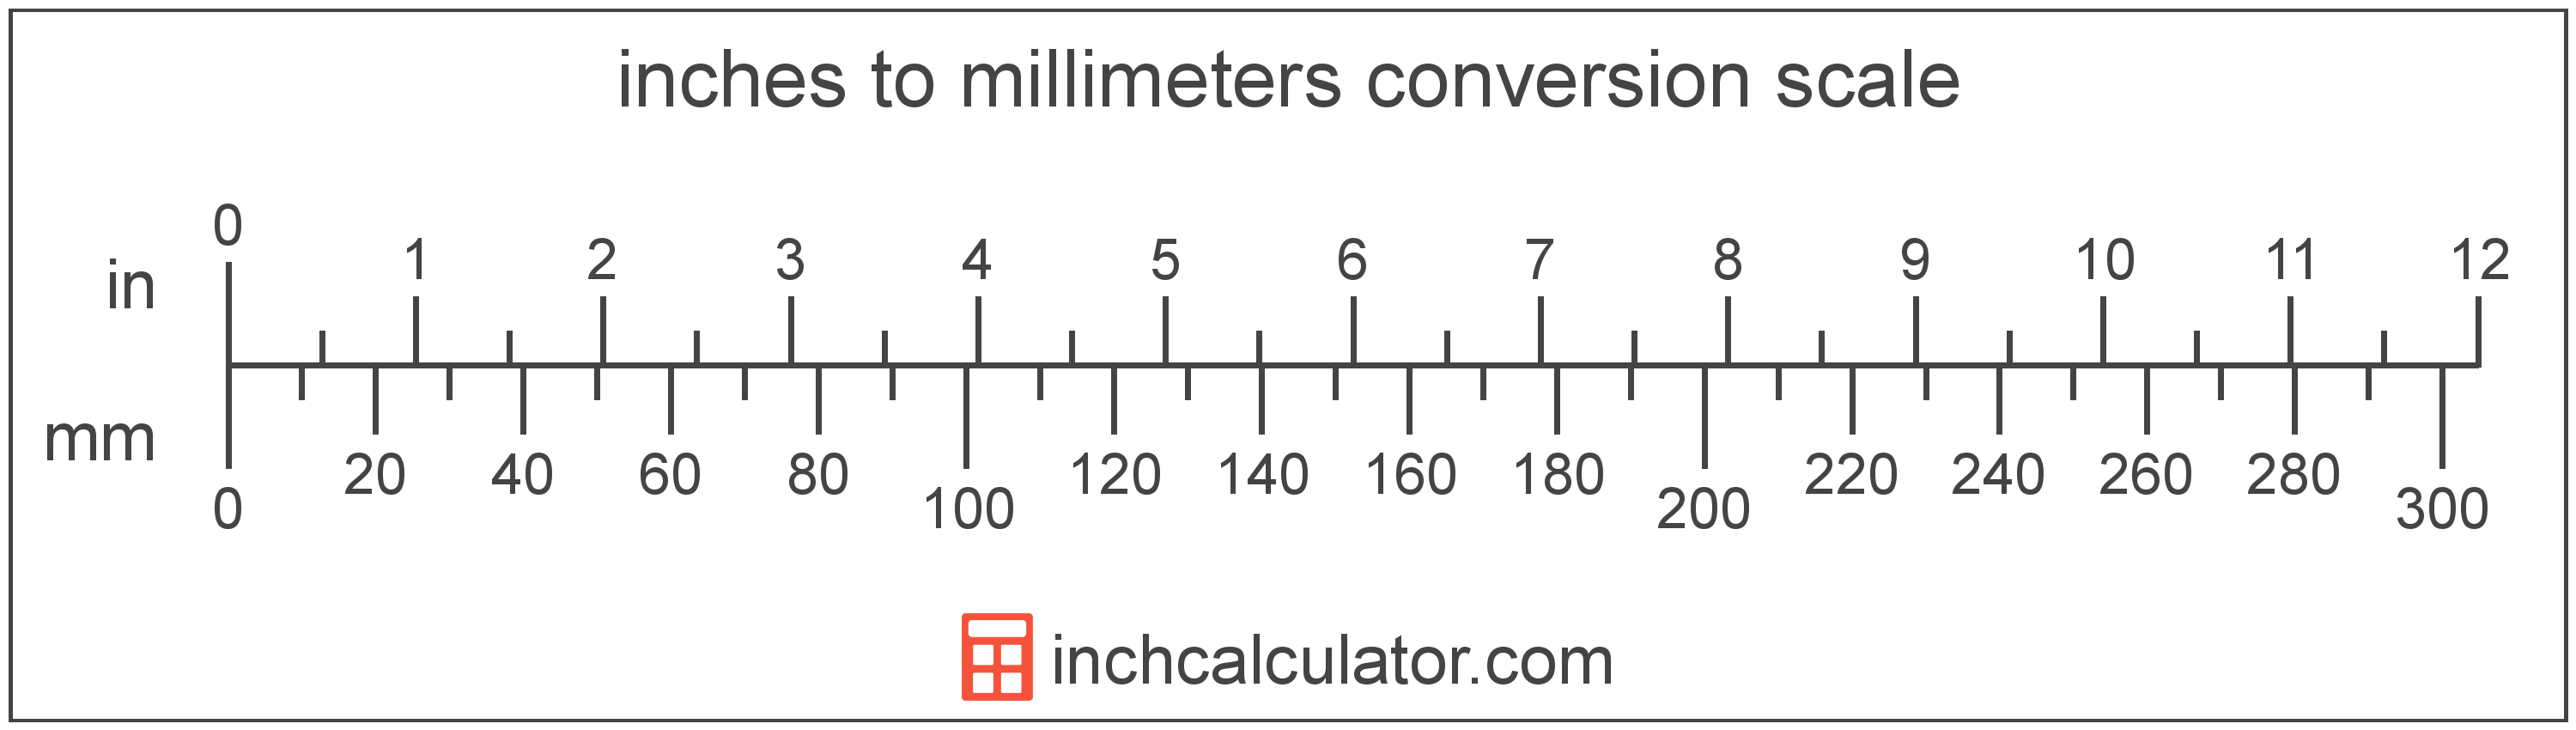 Inches to feet in to ft) conversion calculator